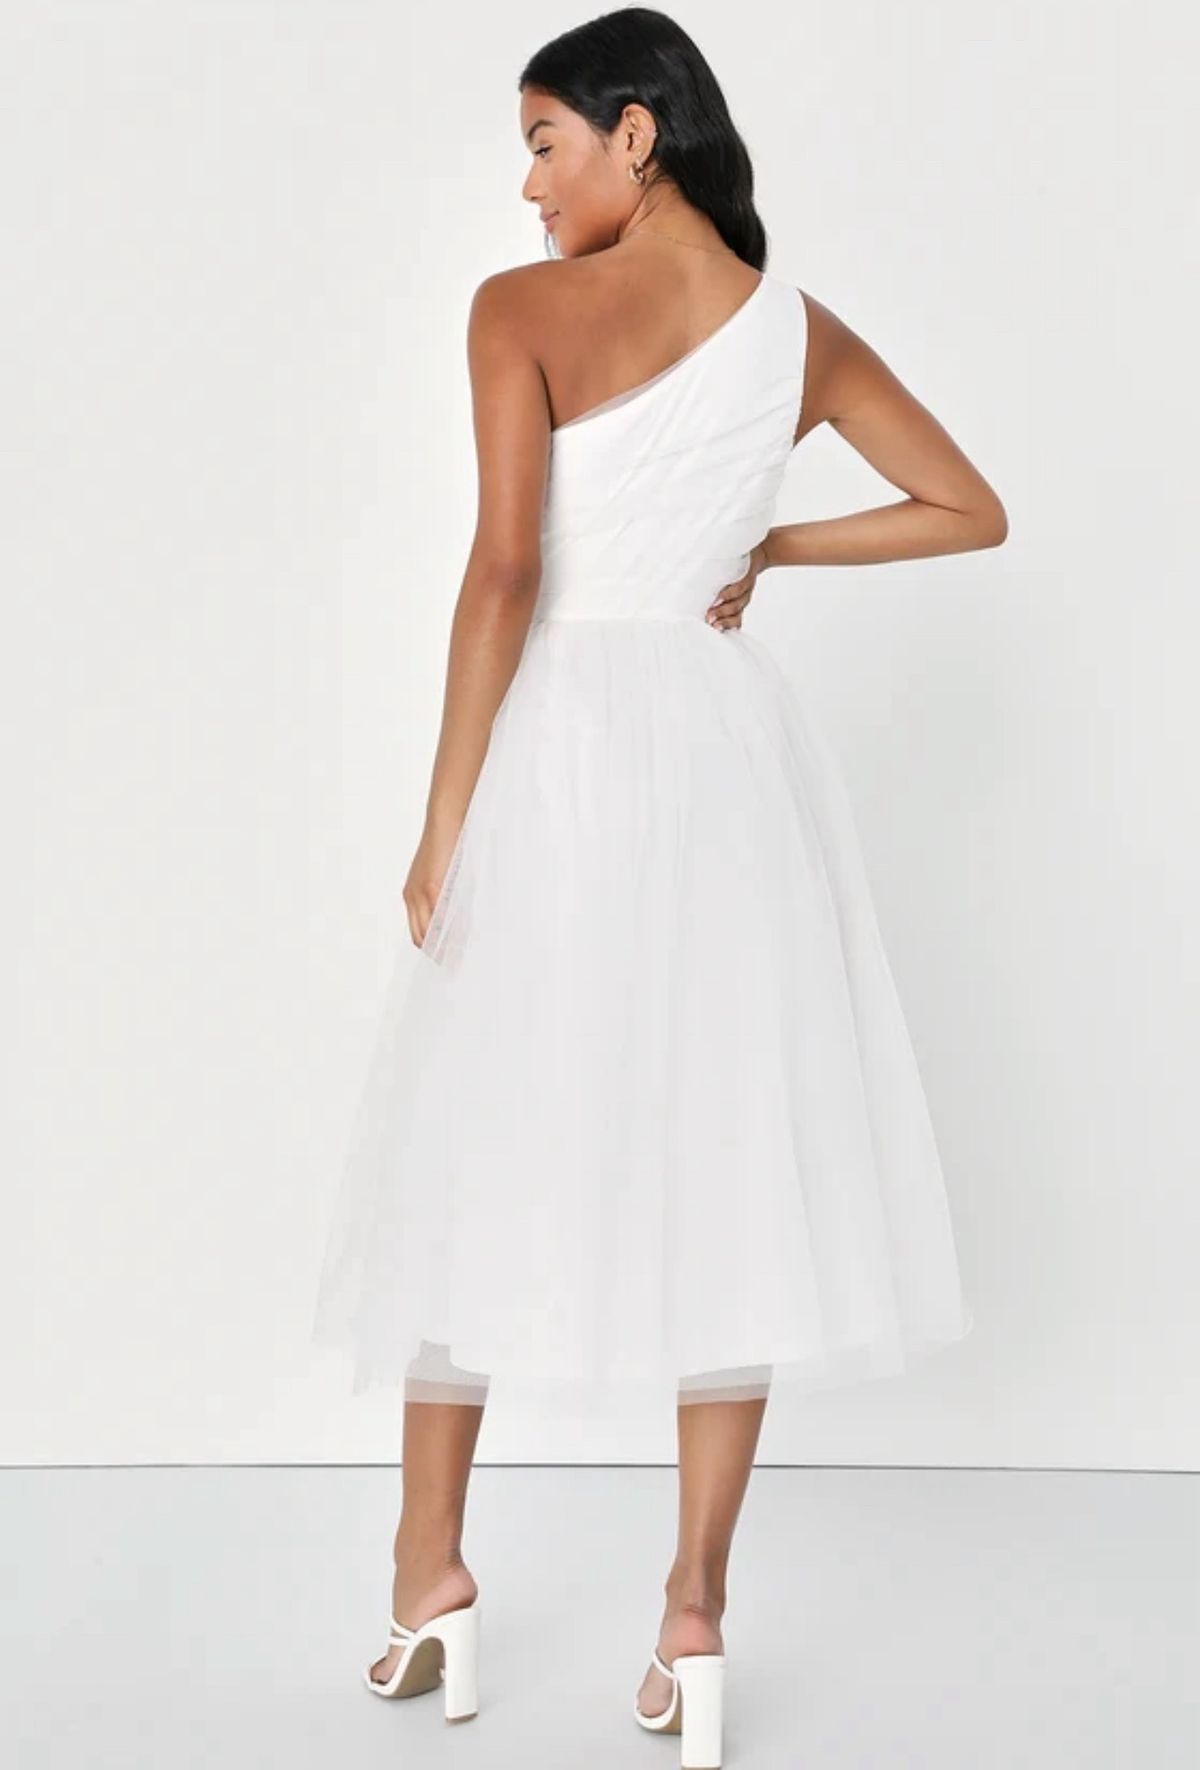 Lulus Size 2 Prom One Shoulder White Cocktail Dress on Queenly